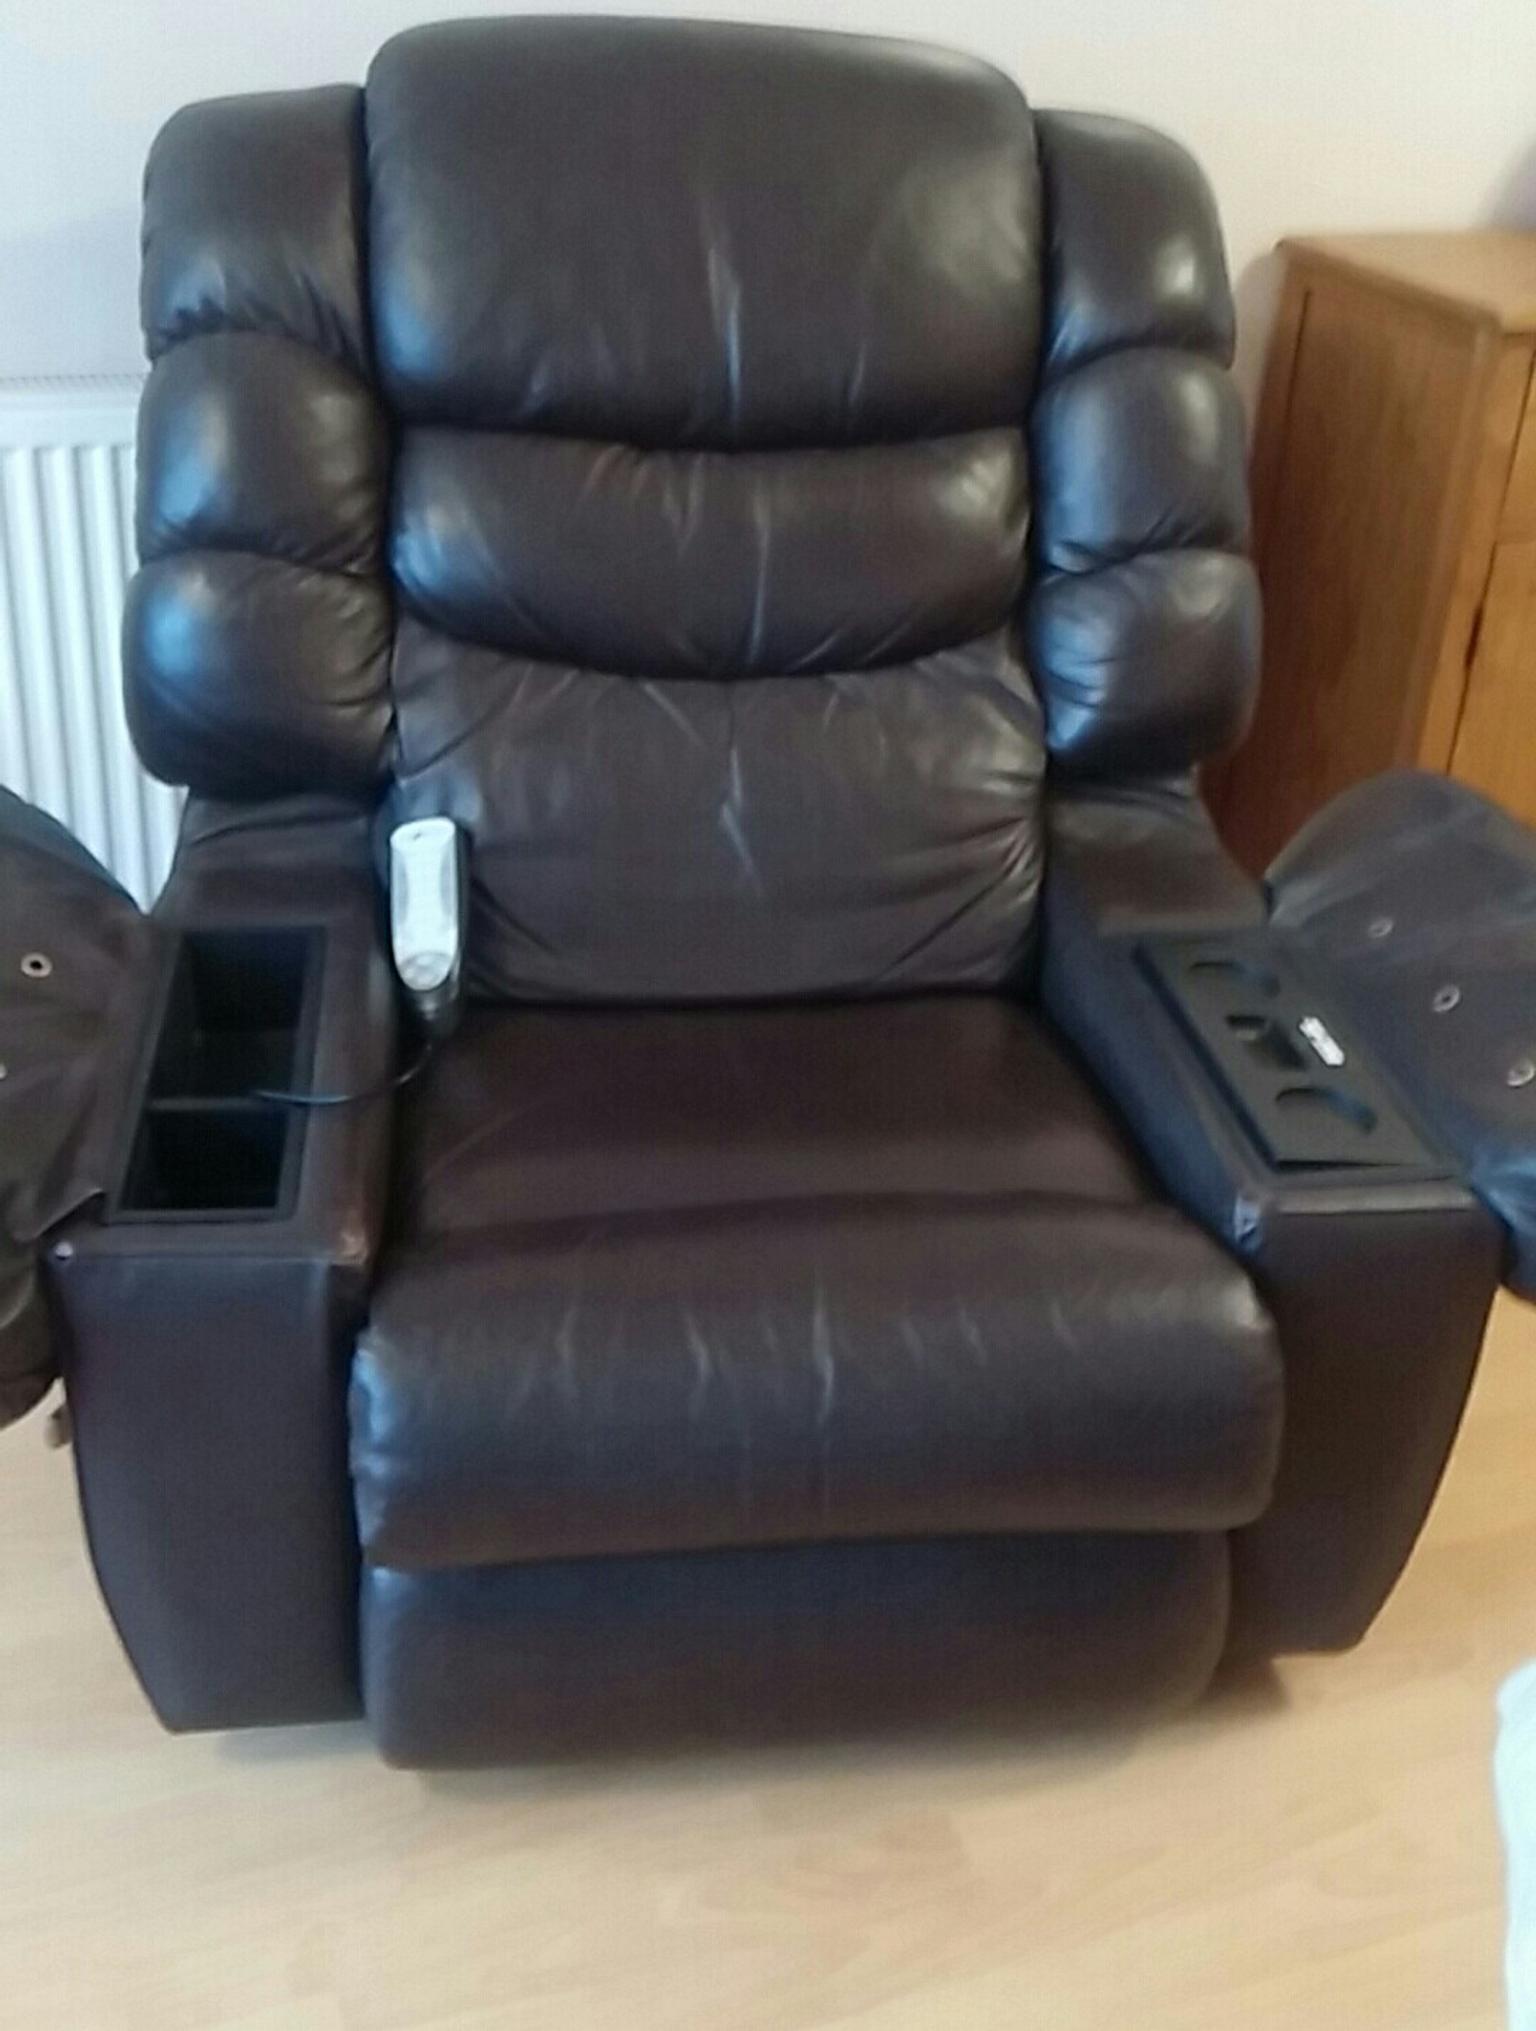 Reclining Lazy Boy Chair In Coventry For 50 00 For Sale Shpock